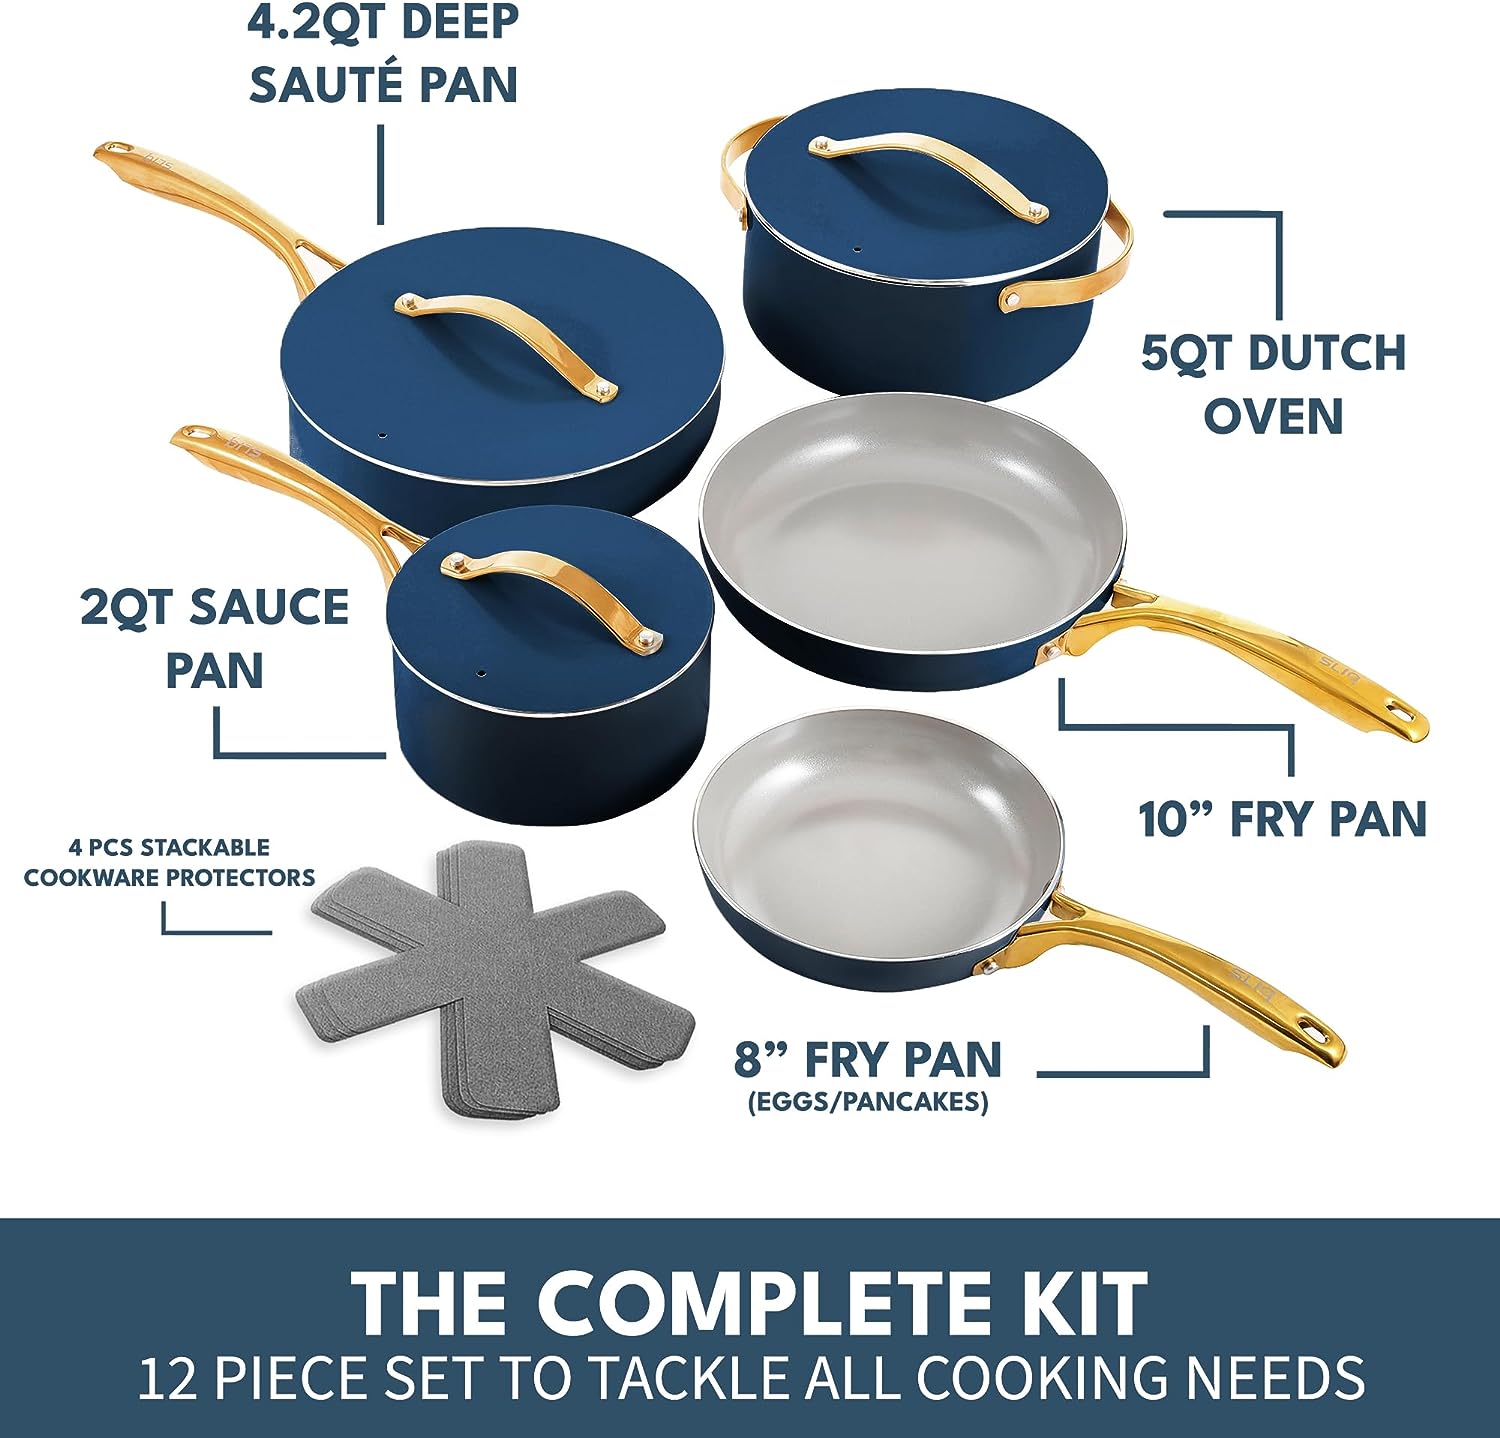 Ceramic Nonstick Cookware Set (12 pcs), Non Toxic PFOA and PTFE Free Pots  and Pans Set with Lids, Oven and Dishwasher Safe, Induction Compatible Pans  Set Nonstick, Blue 